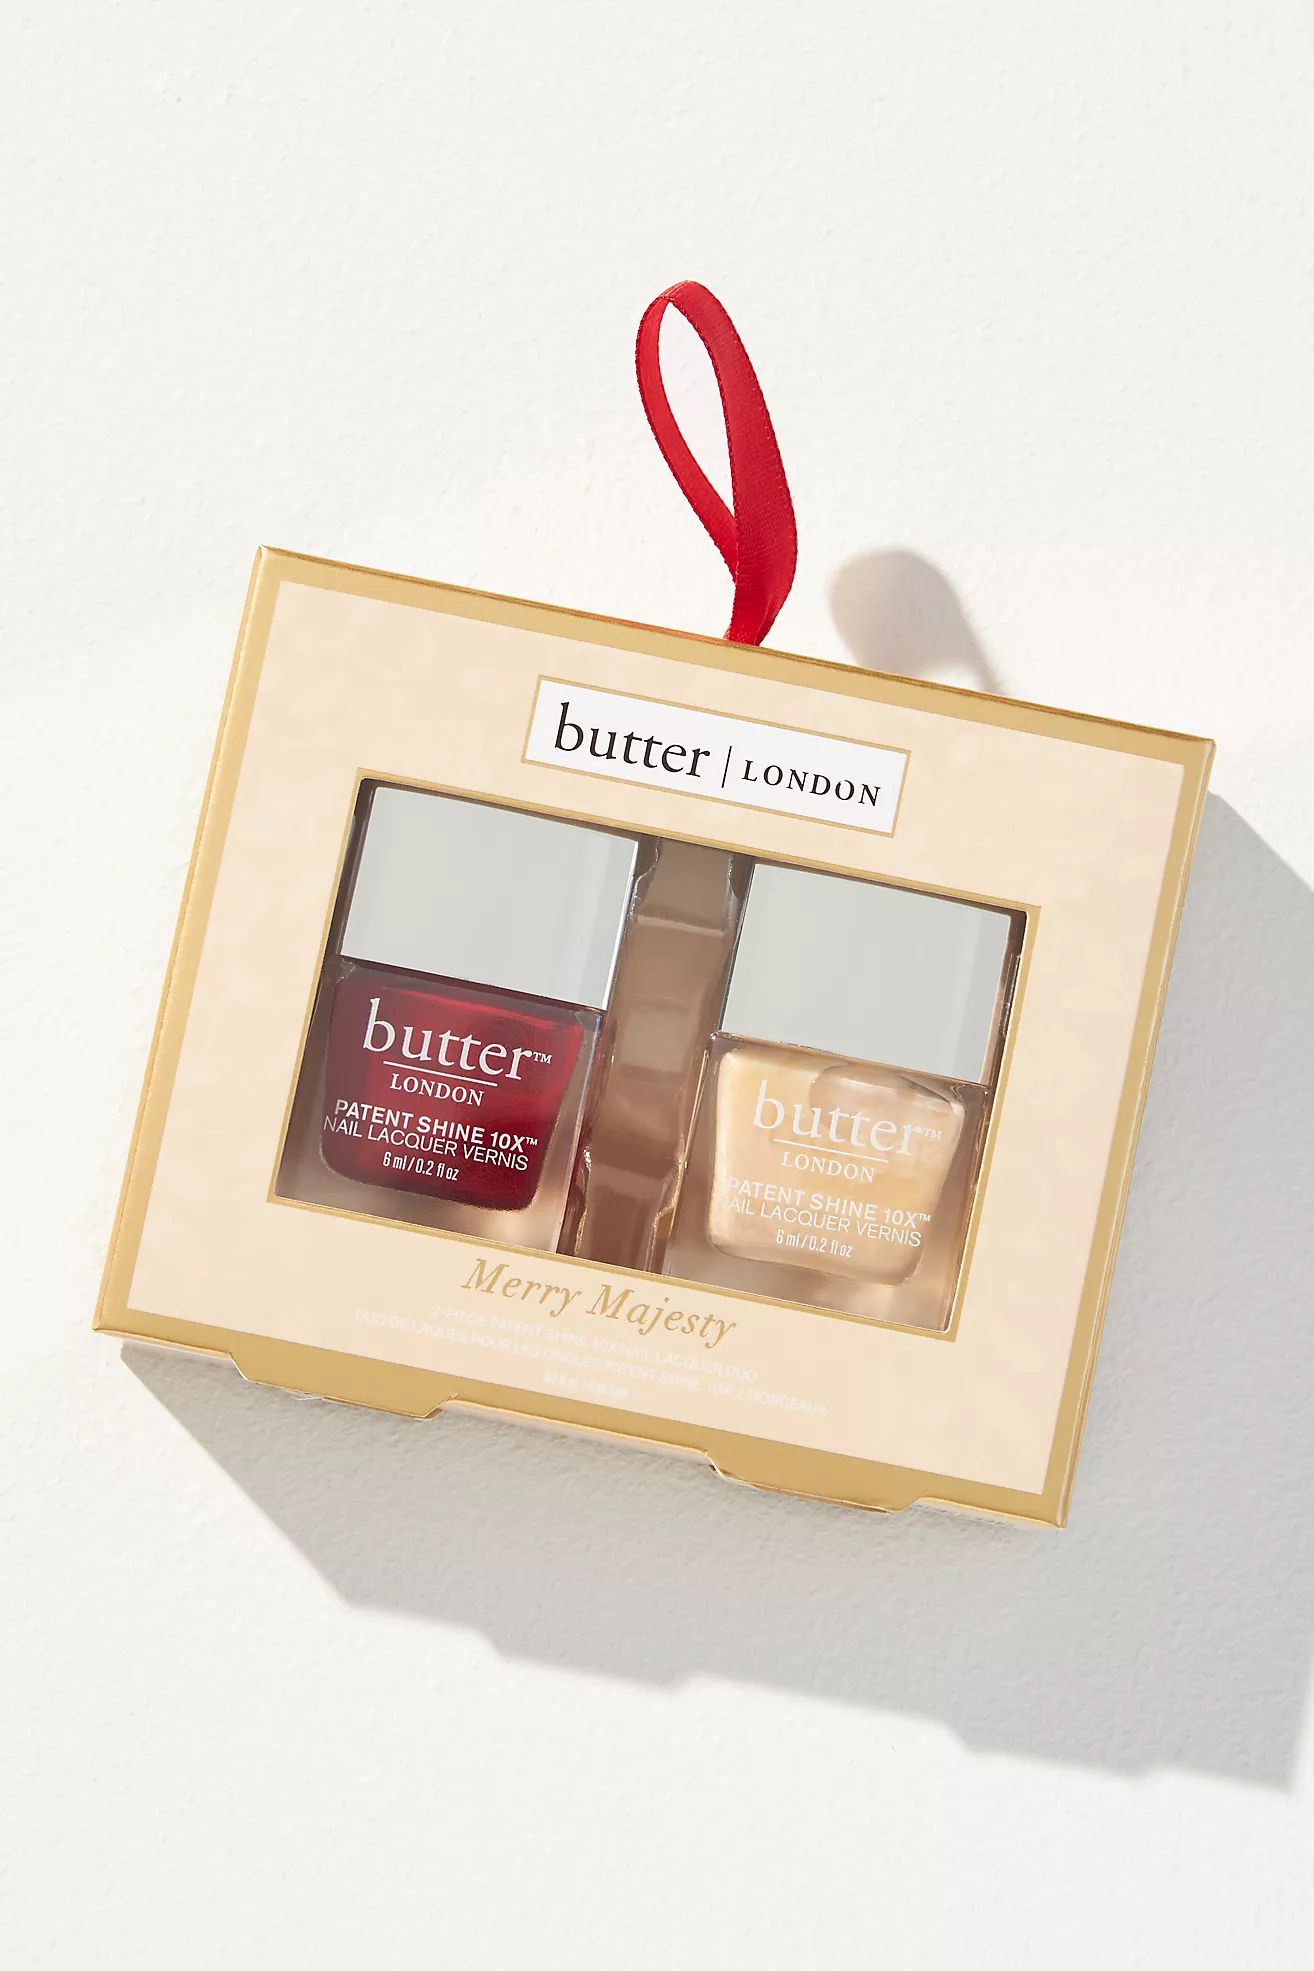 butter LONDON Merry Majesty 2-Piece Mini Patent Shine 10X Nail Lacquer Set | Anthropologie (US)